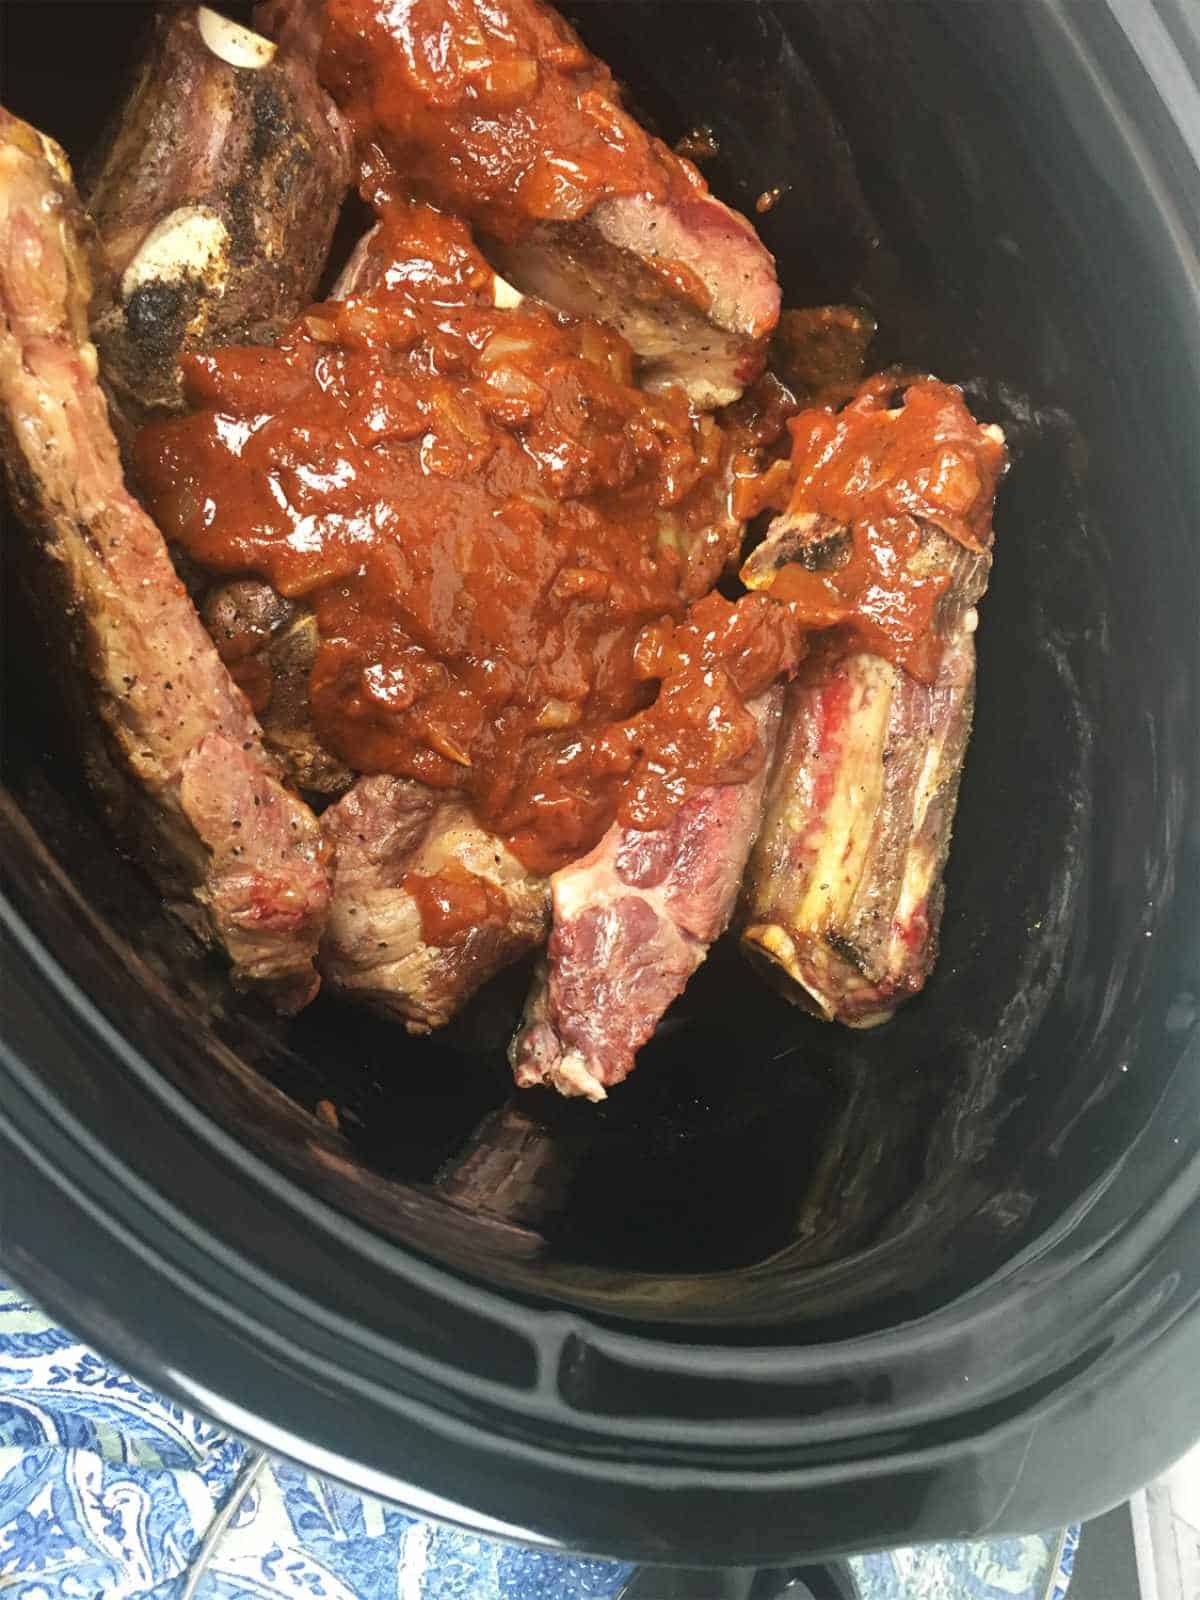 pan gravy added on top of beef back ribs in a crockpot.